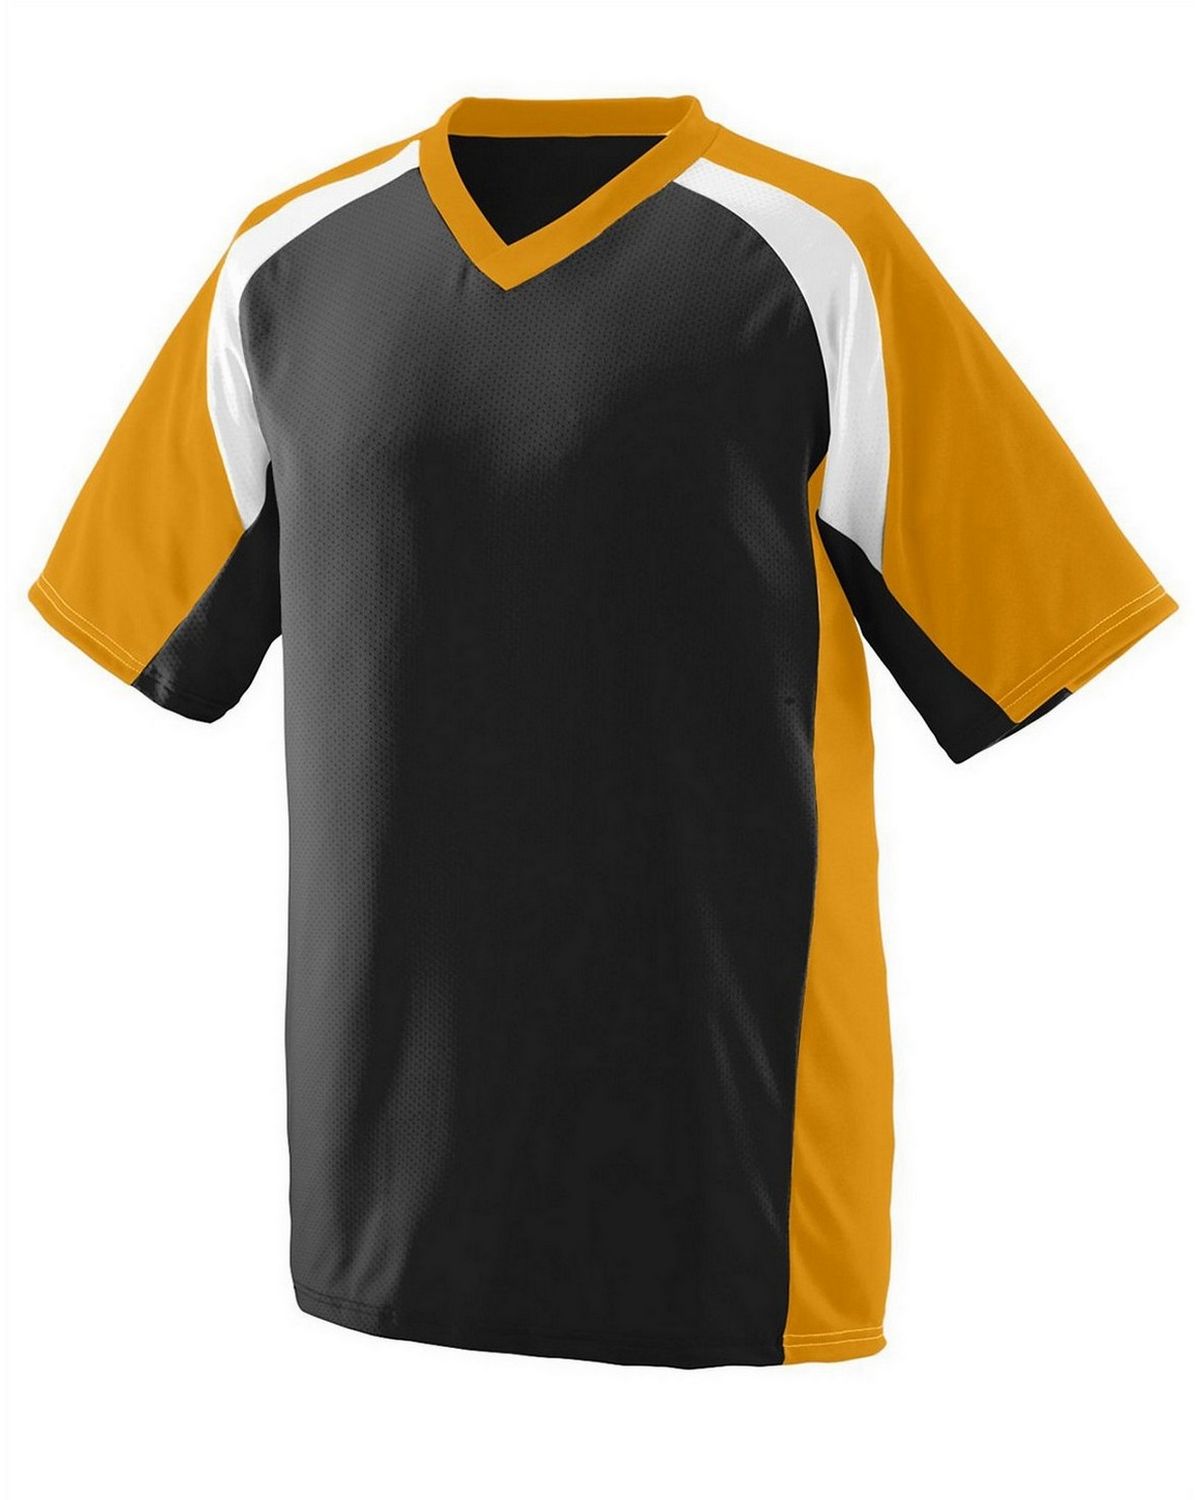 Augusta Sportswear 1536 Youth Wicking Jersey with Inserts